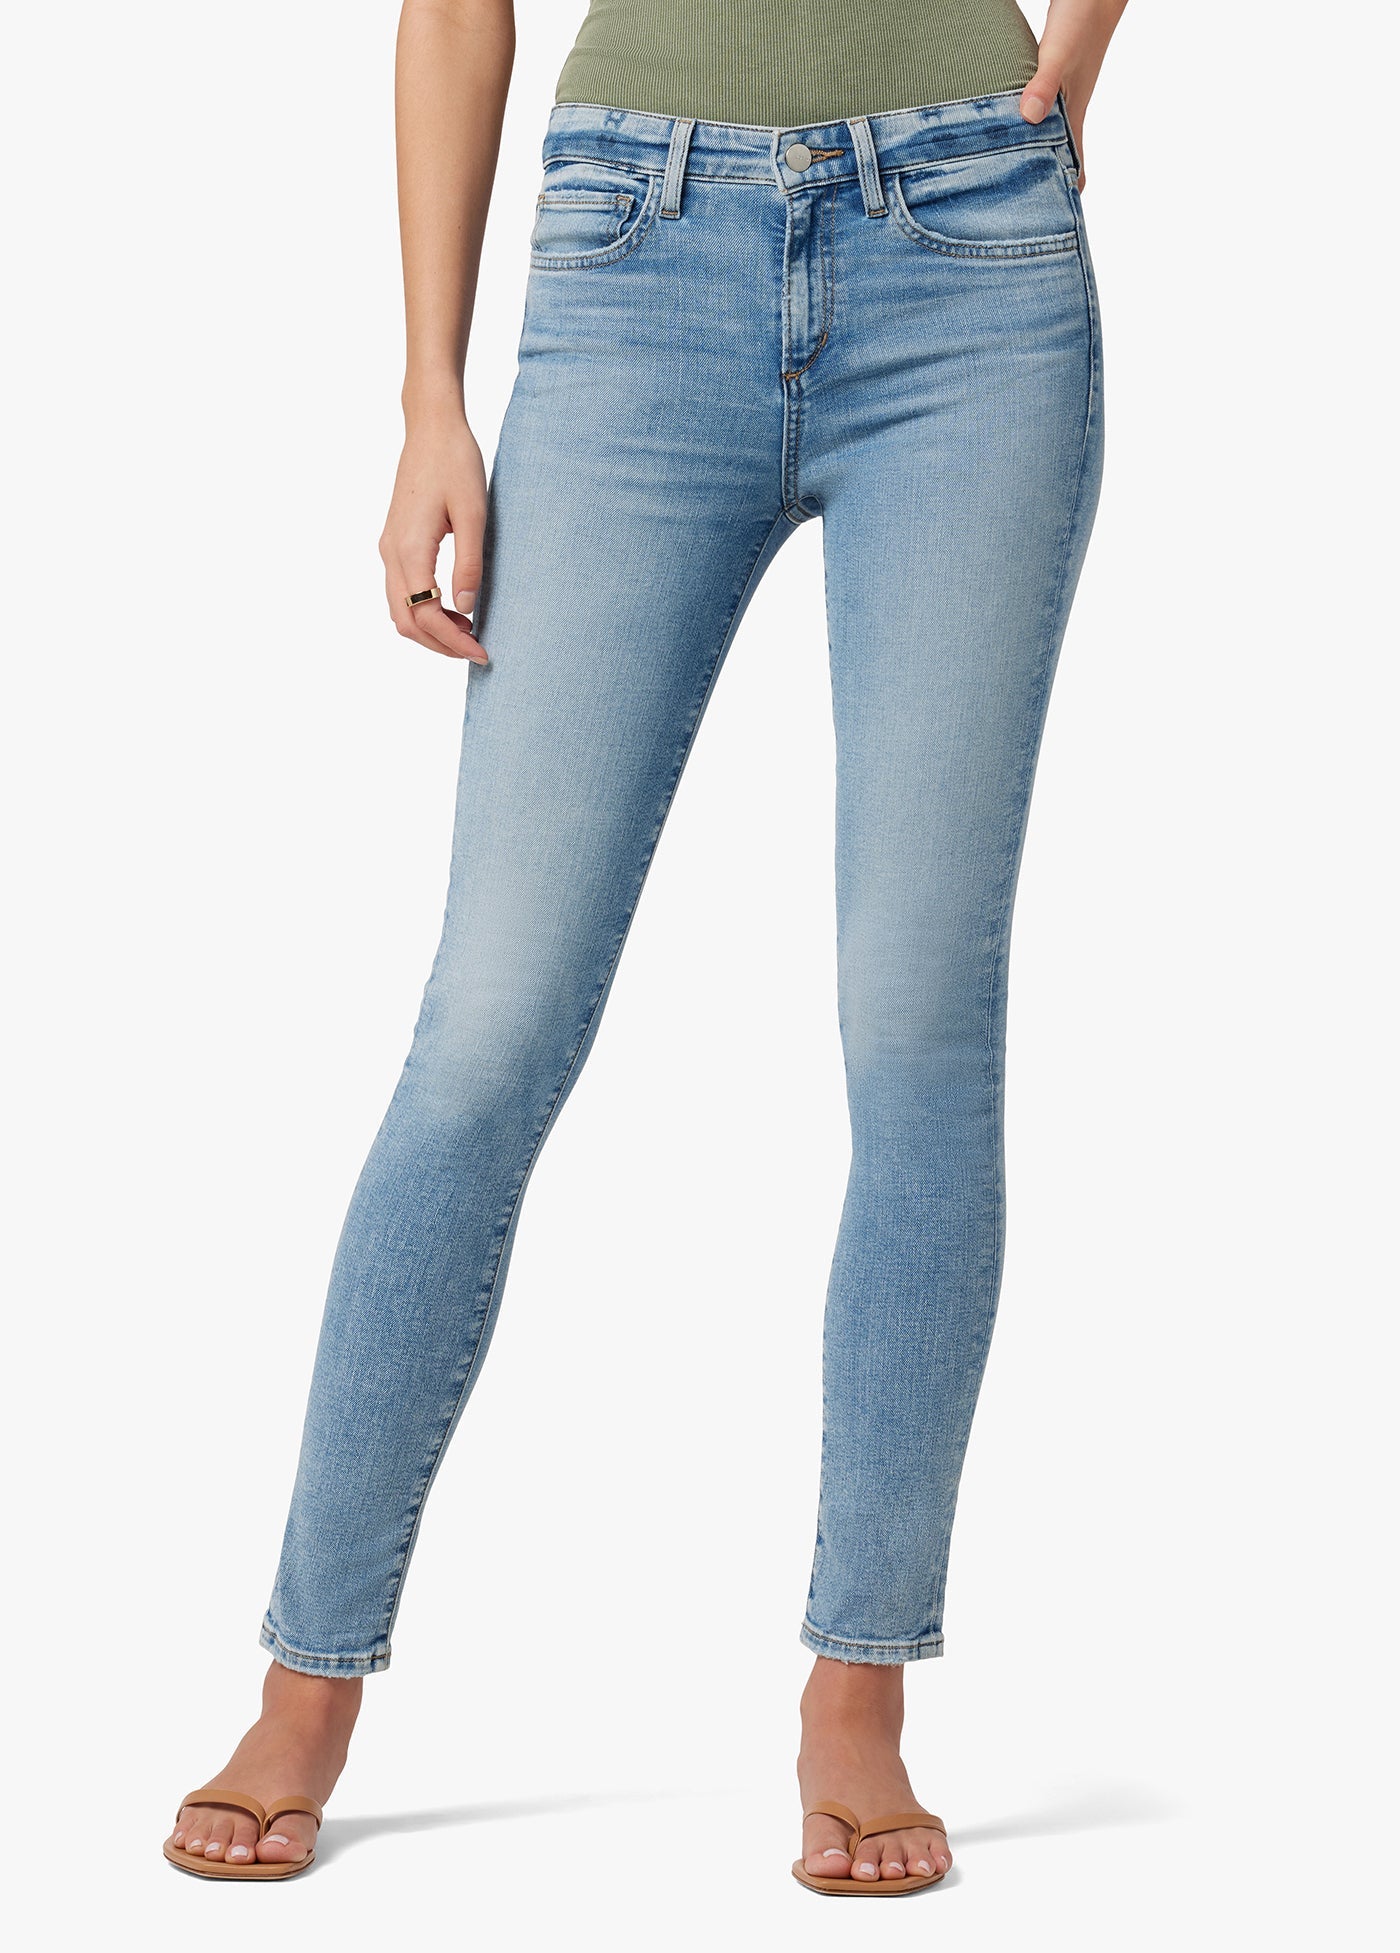 The icon crop cuffed jeans